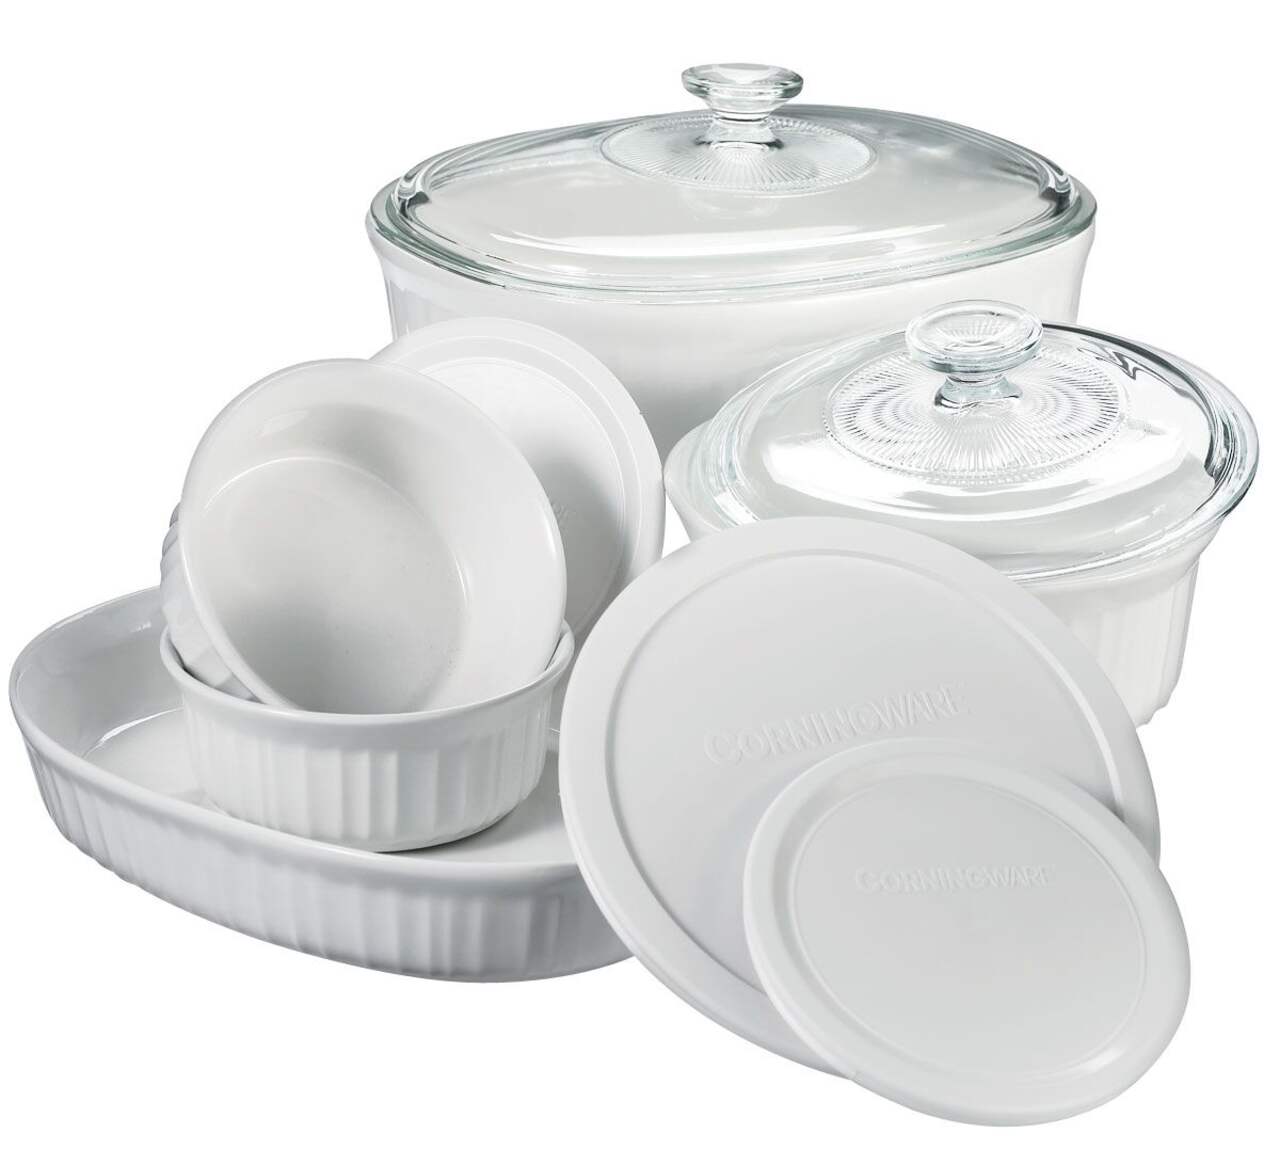 https://media-www.canadiantire.ca/product/living/kitchen/bakeware-baking-prep/0420956/french-white-10-piece-set-bakeware-90a55271-34d0-4b5c-9836-2d7fee05c743-jpgrendition.jpg?imdensity=1&imwidth=640&impolicy=mZoom